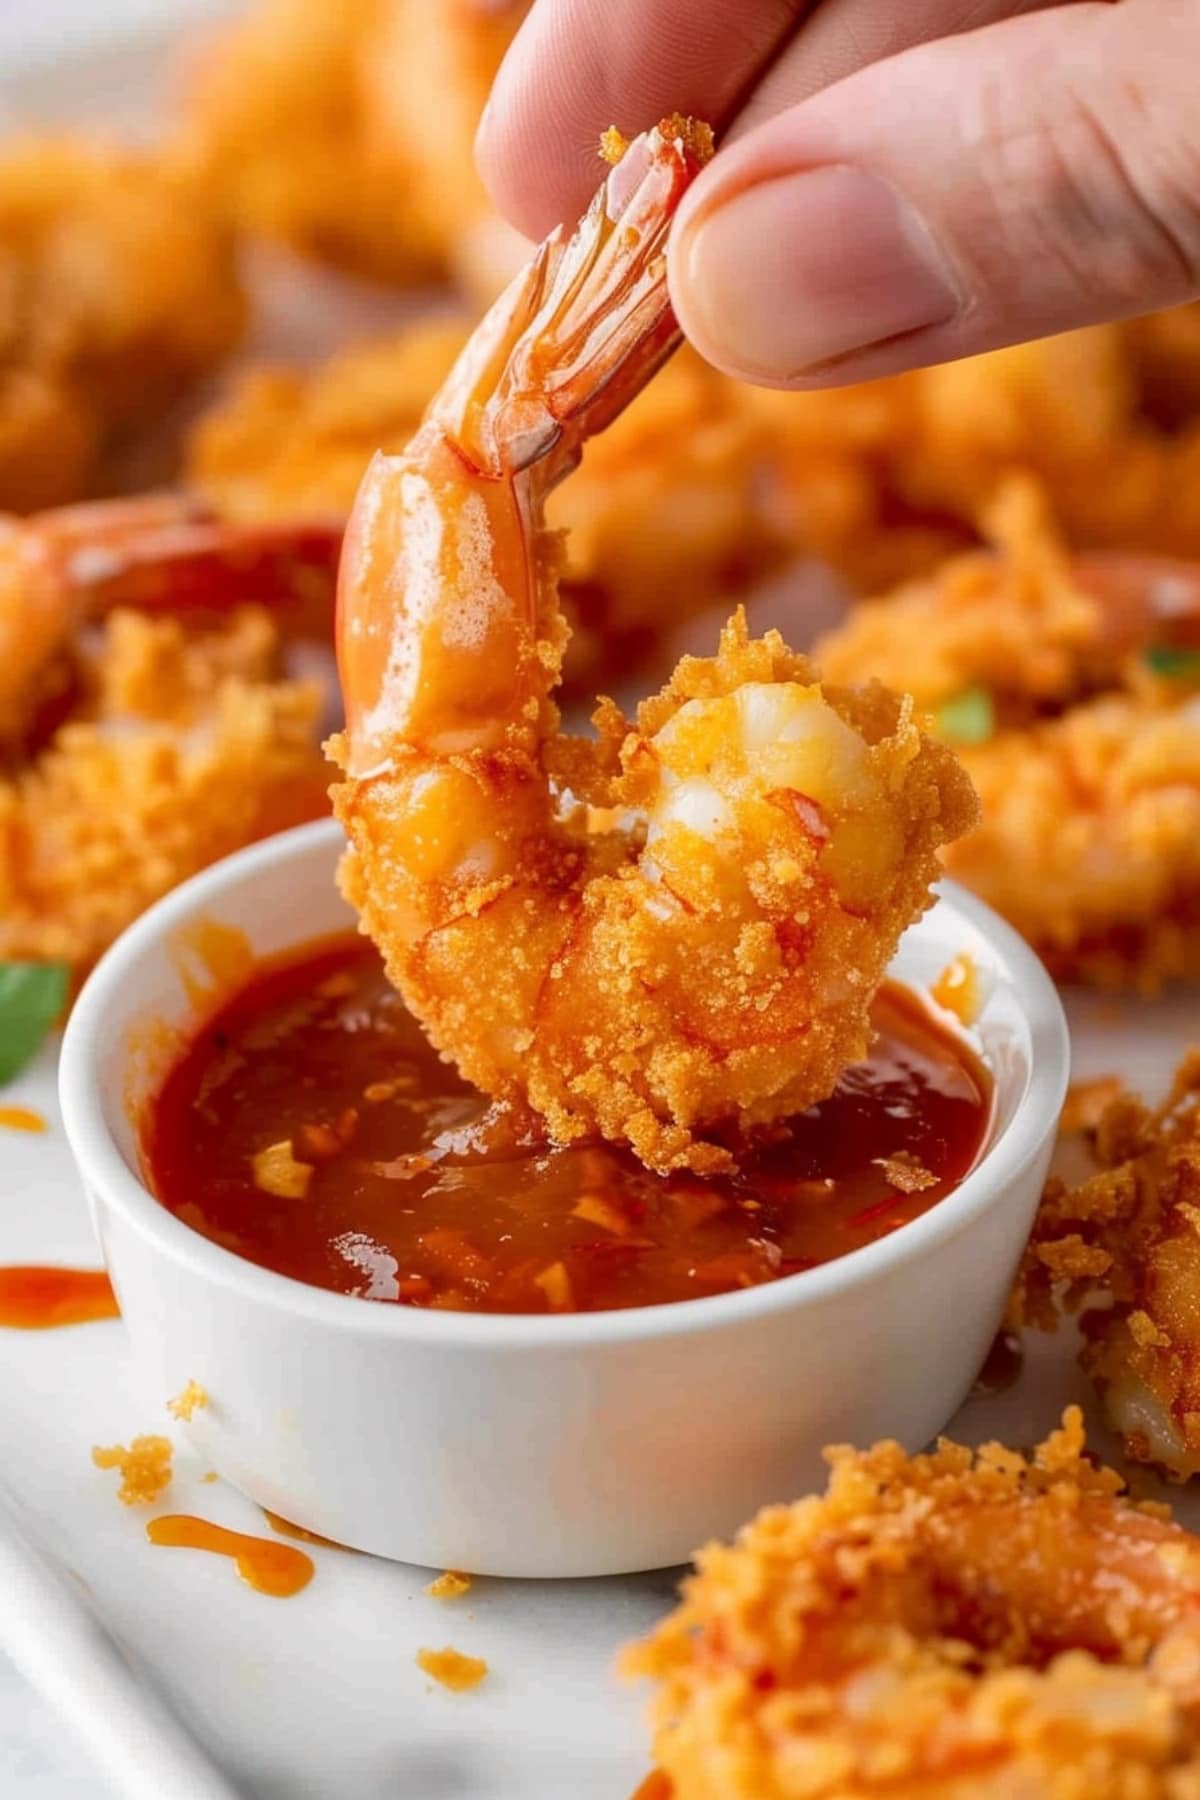 Hand dipping coconut breaded shrimp in a sauce.